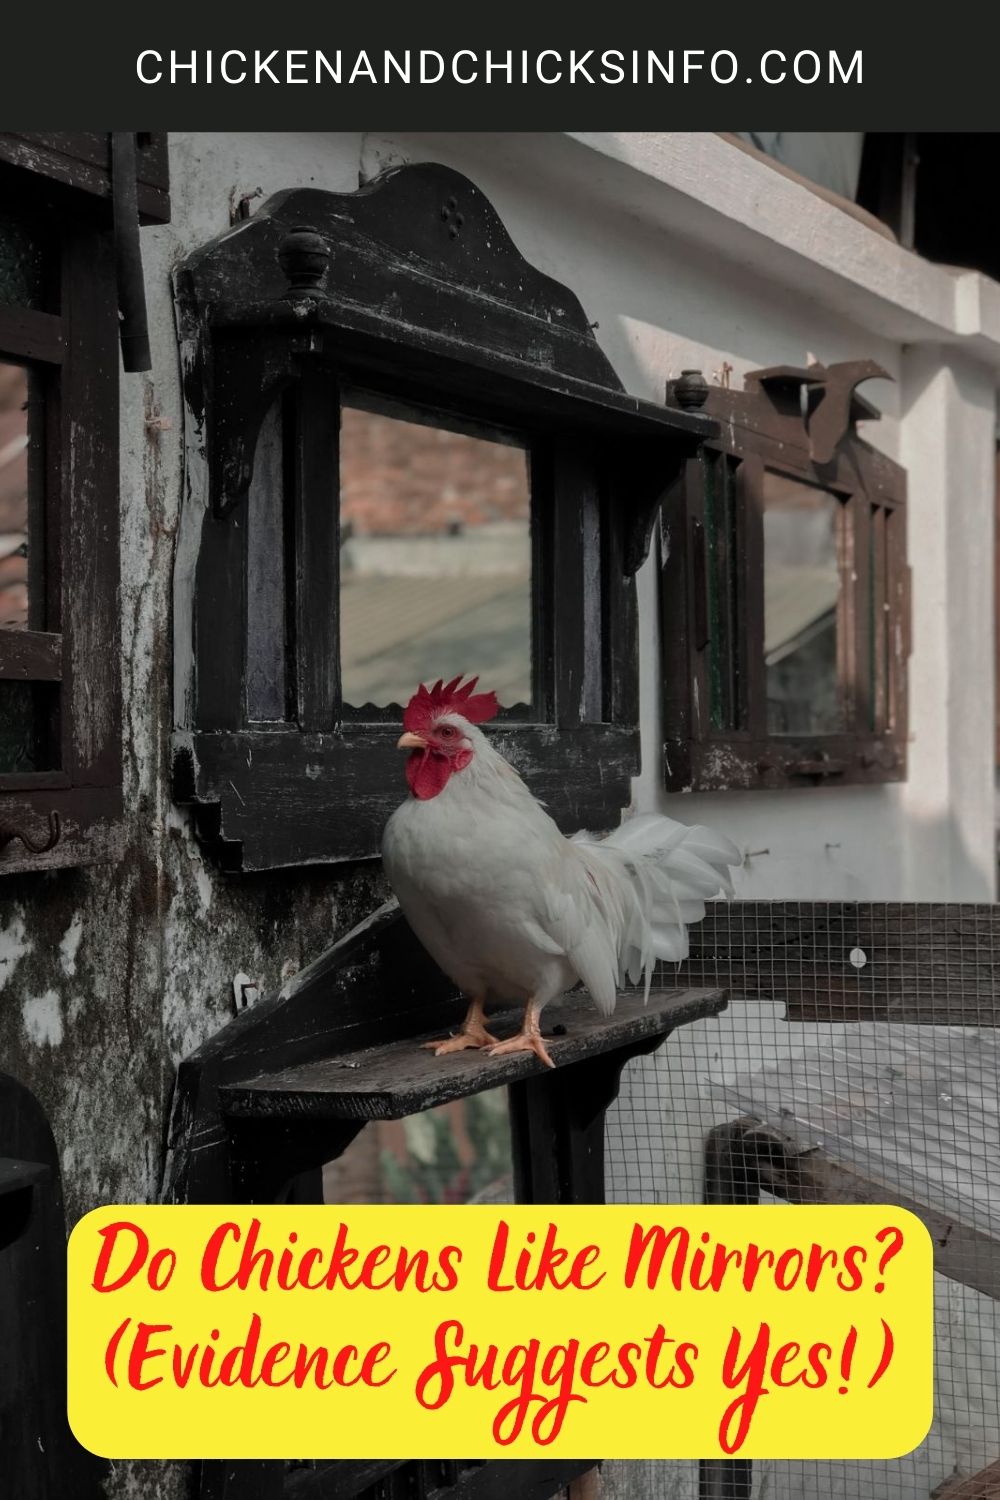 Do Chickens Like Mirrors? (Evidence Suggests Yes!) poster.